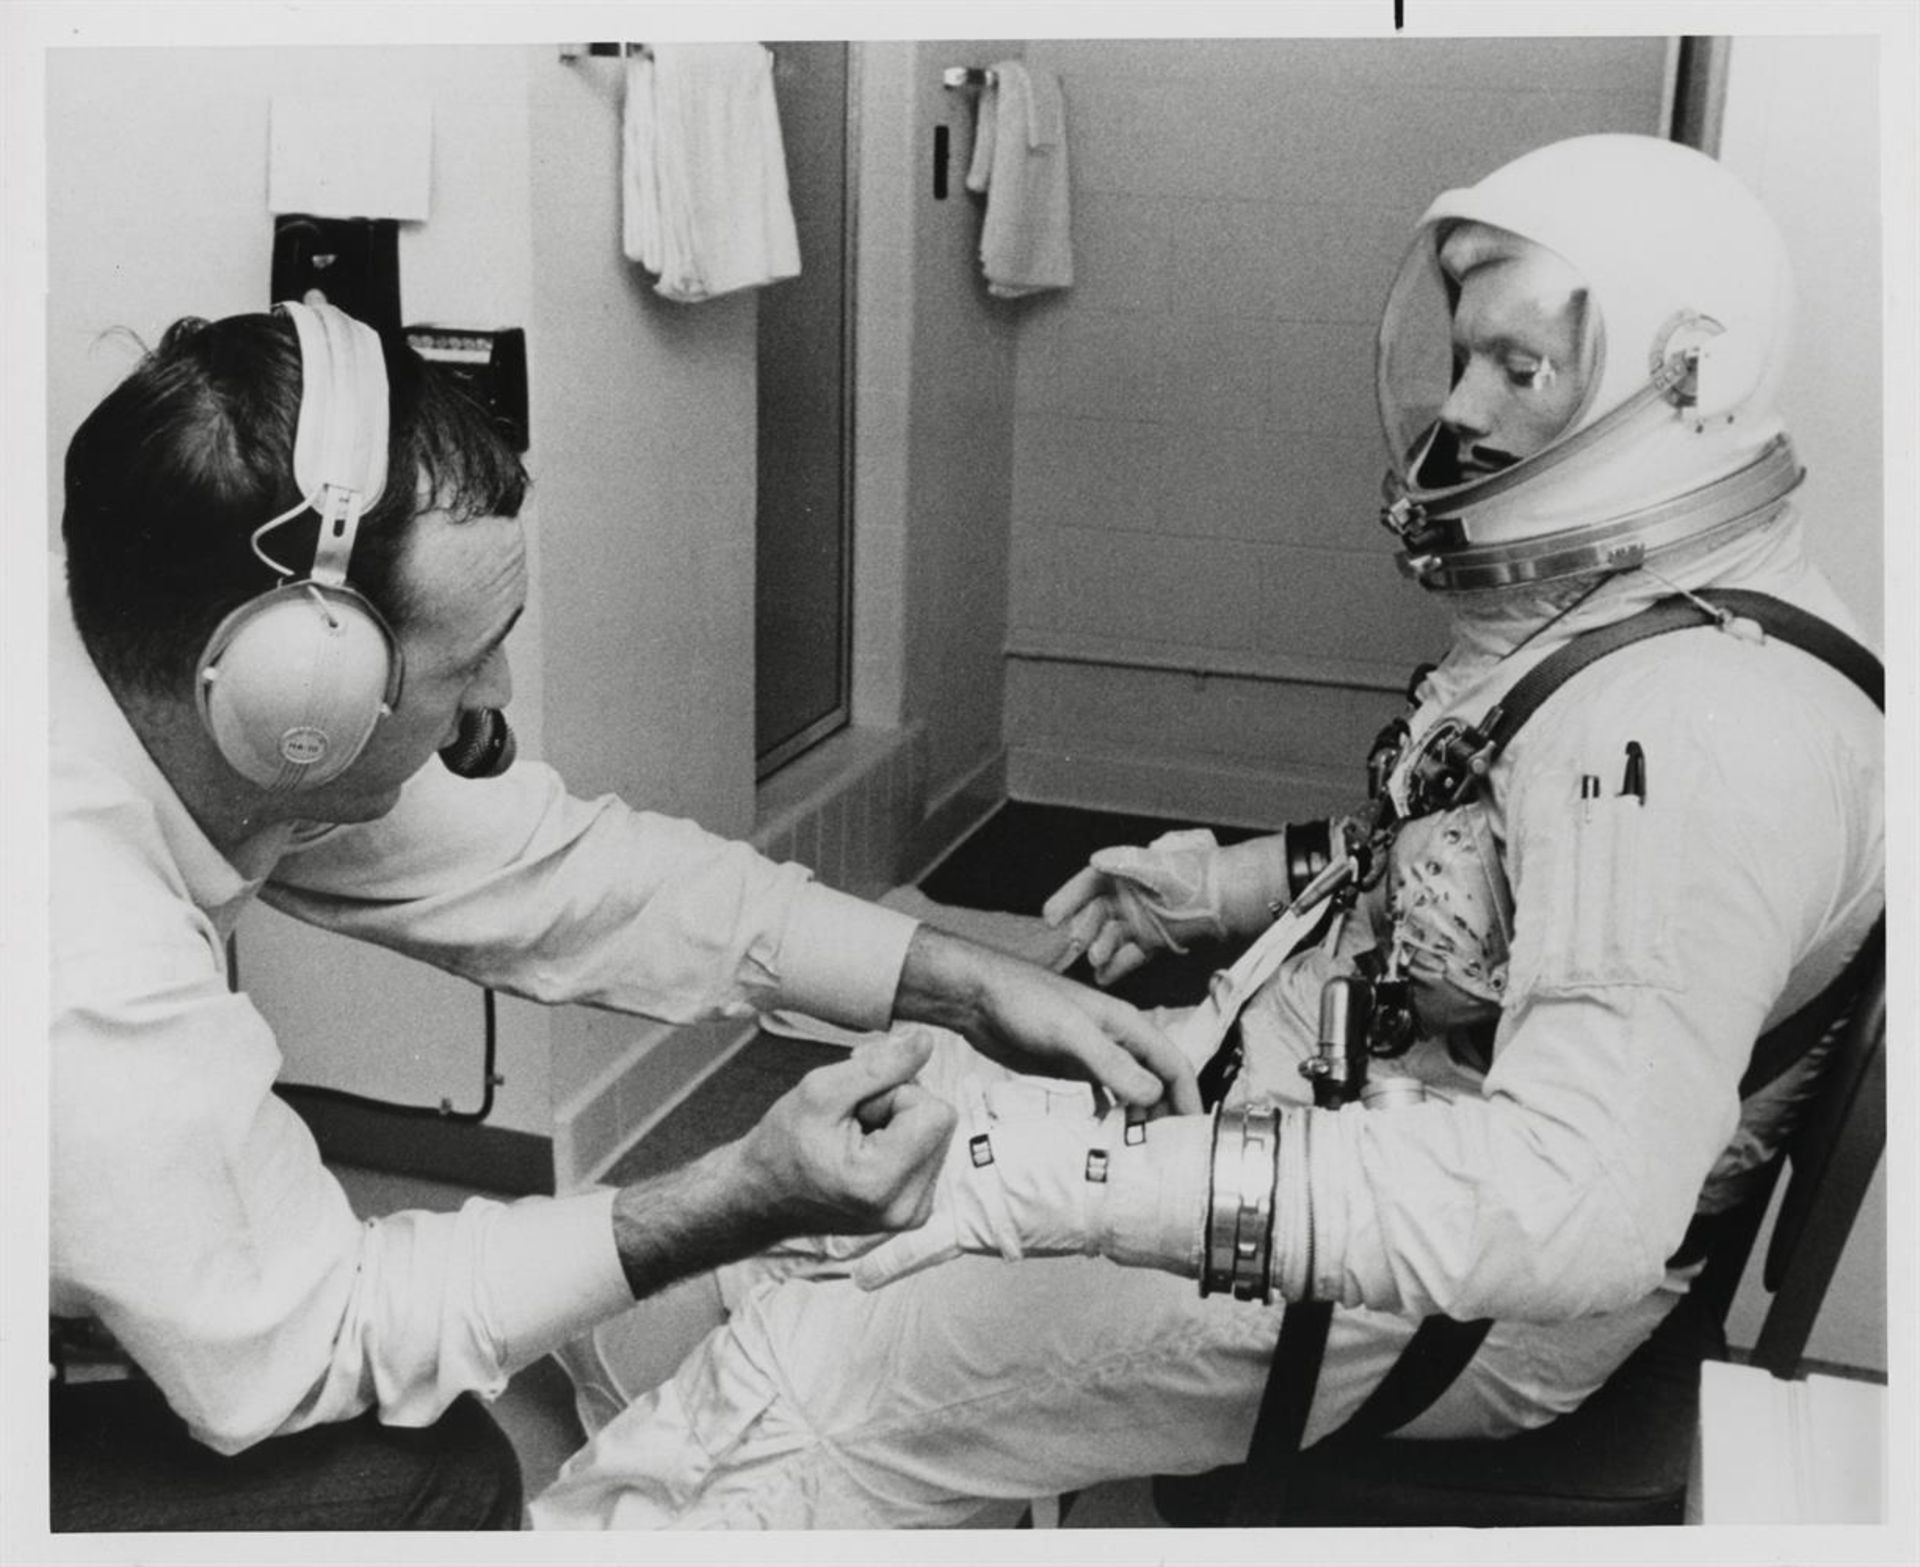 Neil Armstrong & Dave Scott preparing for the first docking in space (2 views), Gemini 8 - Image 2 of 5